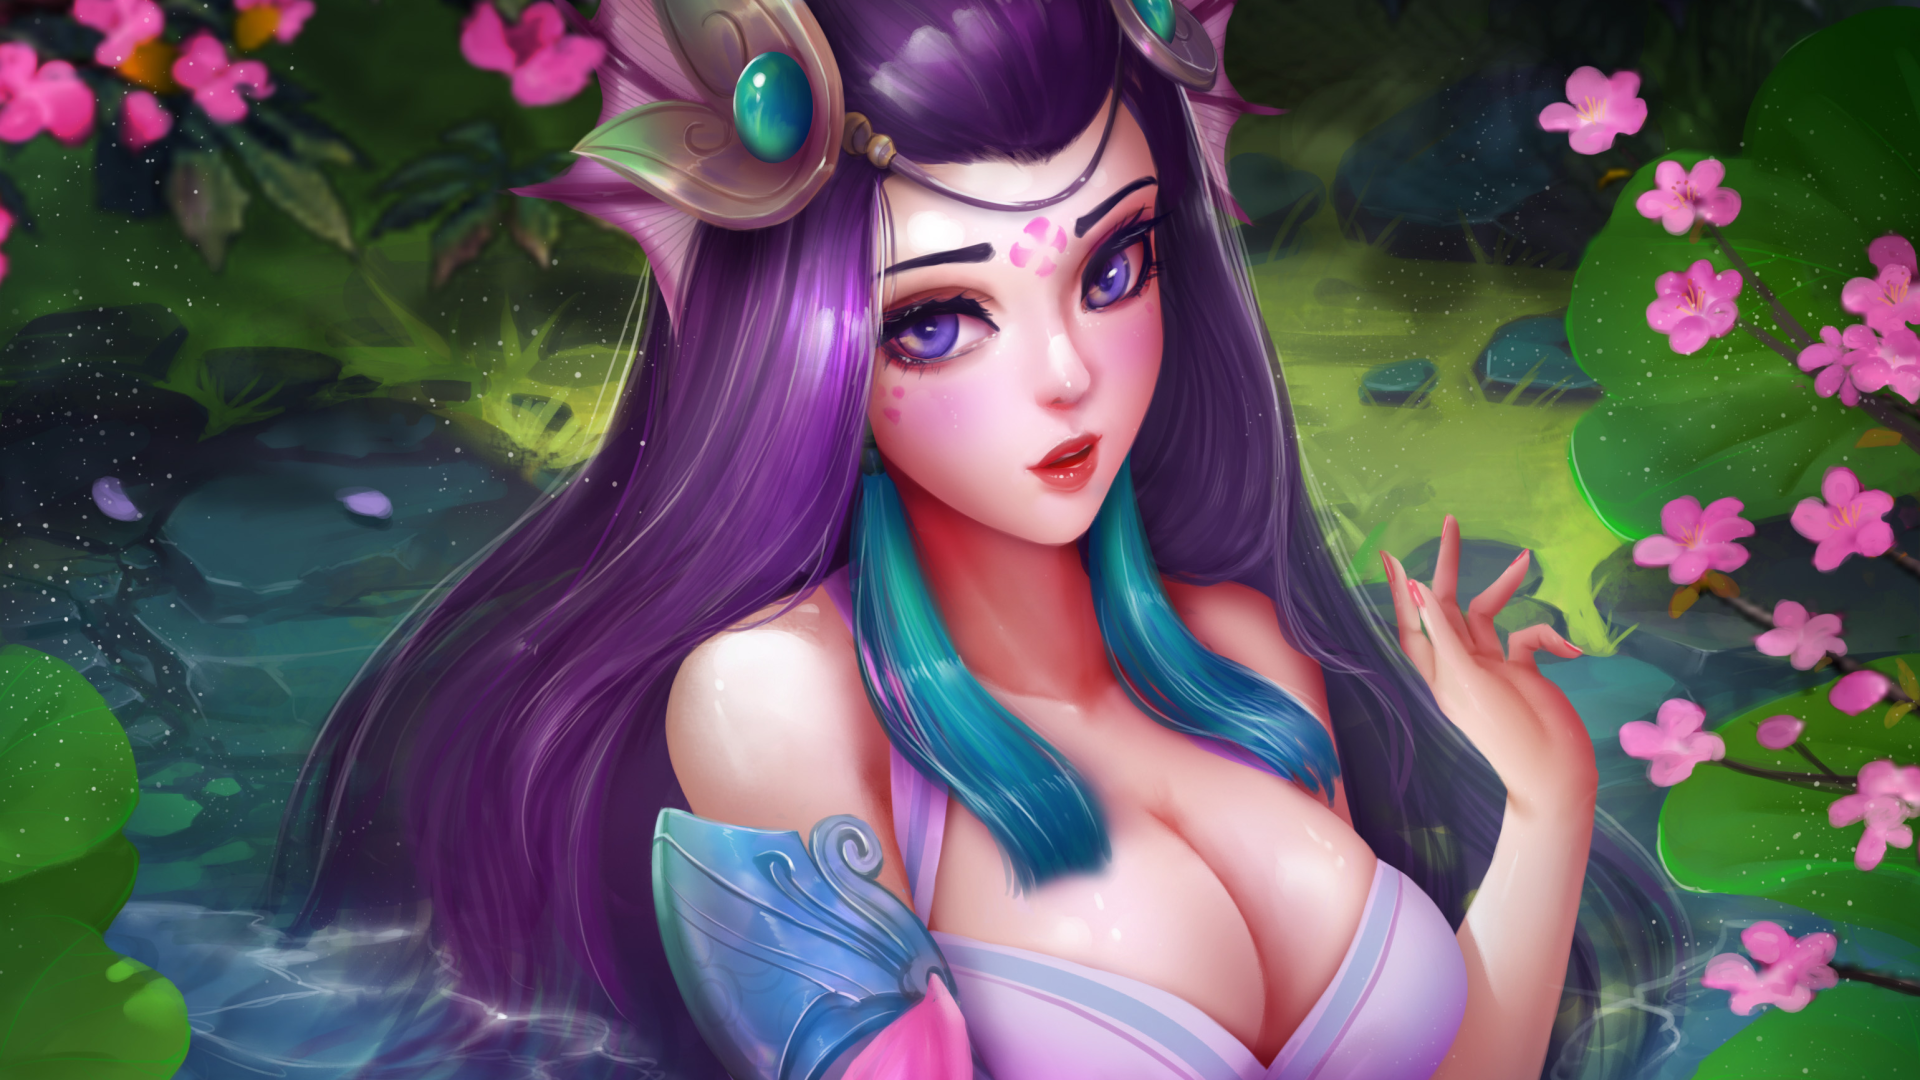 General 1920x1080 League of Legends Nami (League of Legends) boobs big boobs purple hair video game art video game girls fantasy art fantasy girl purple eyes red lipstick long hair flowers plants PC gaming